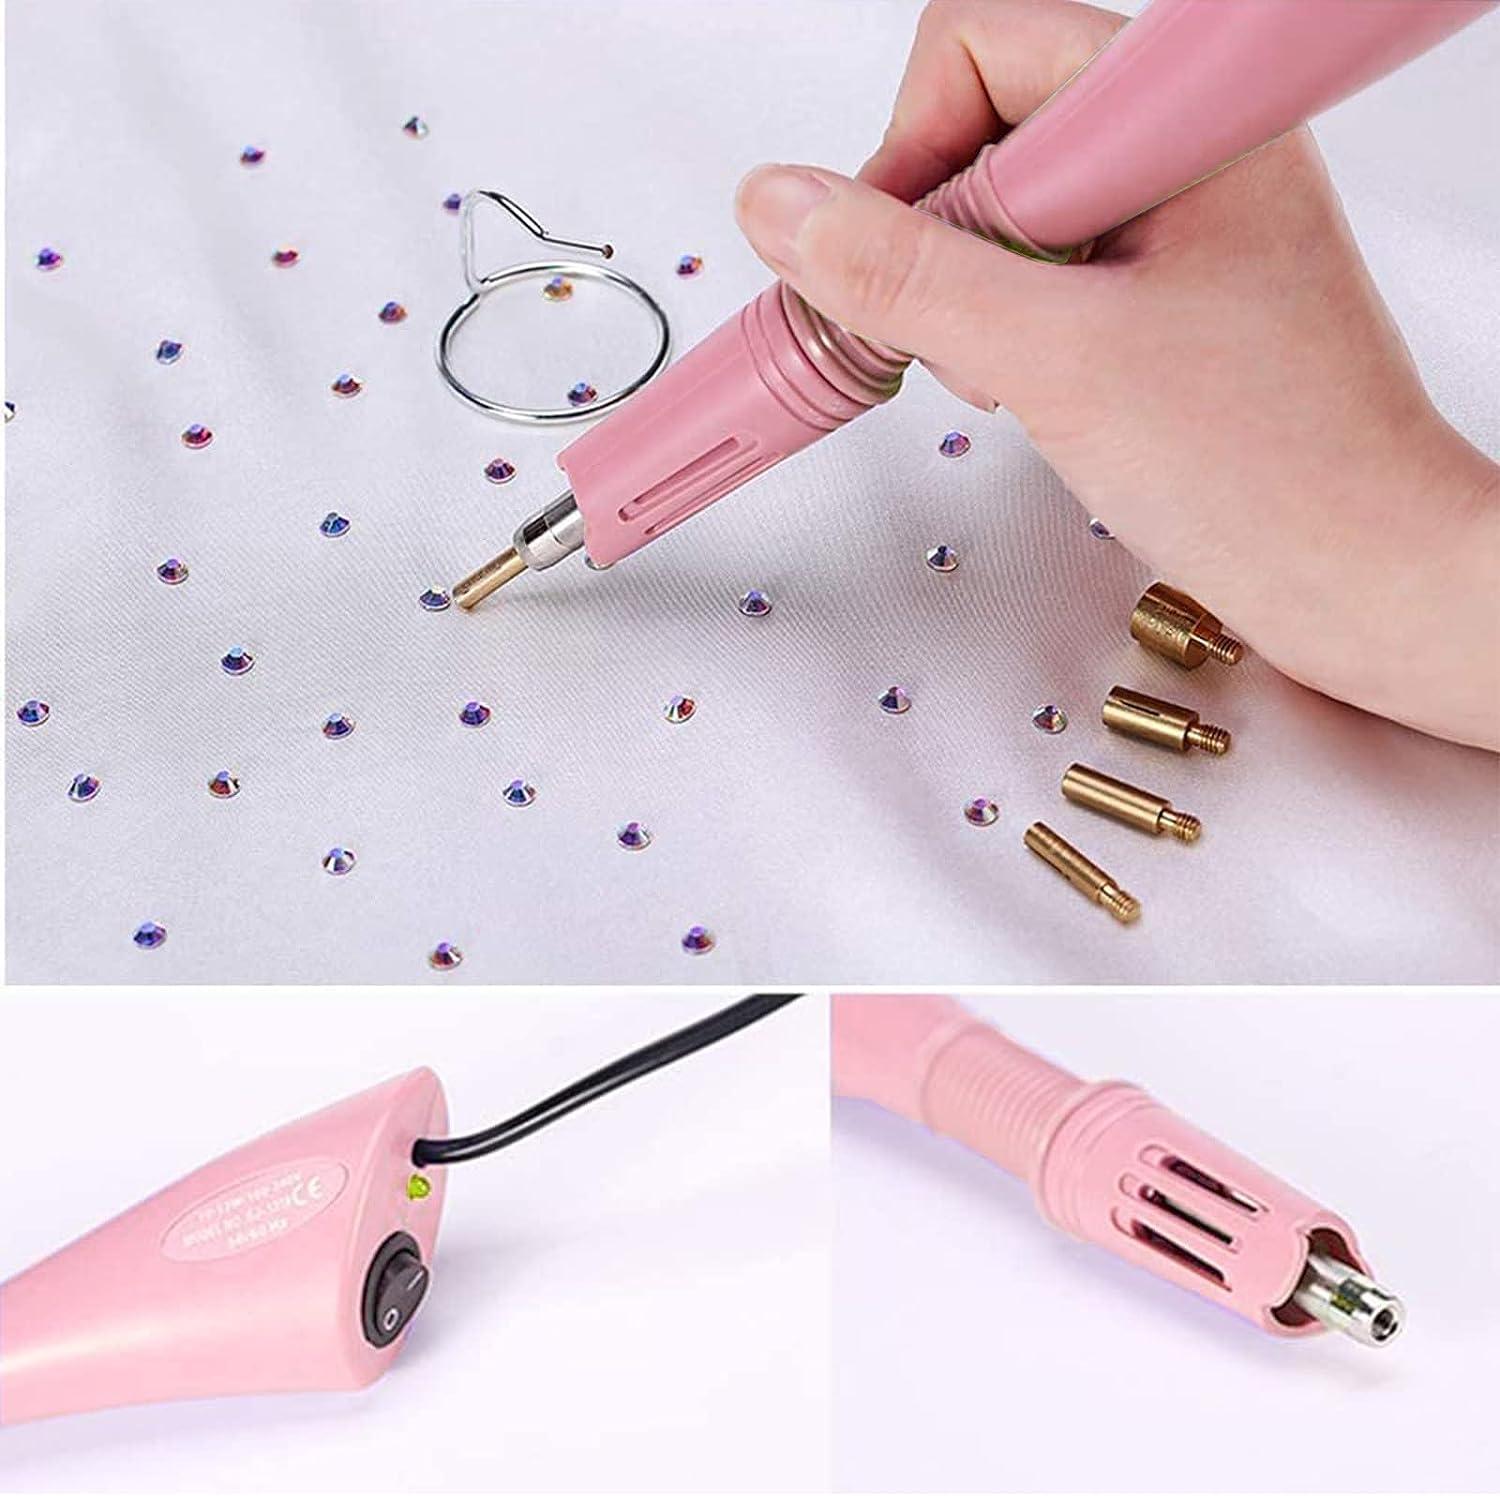 Hotfix Rhinestone Applicator, 7 in 1 Professional Iron-on DIY Hot Fix Tool  Rhinestone Setter Applicator Wand Crystal Gem Tool Kit with 7 Different  Sizes Tips, Support Stand (Pink)